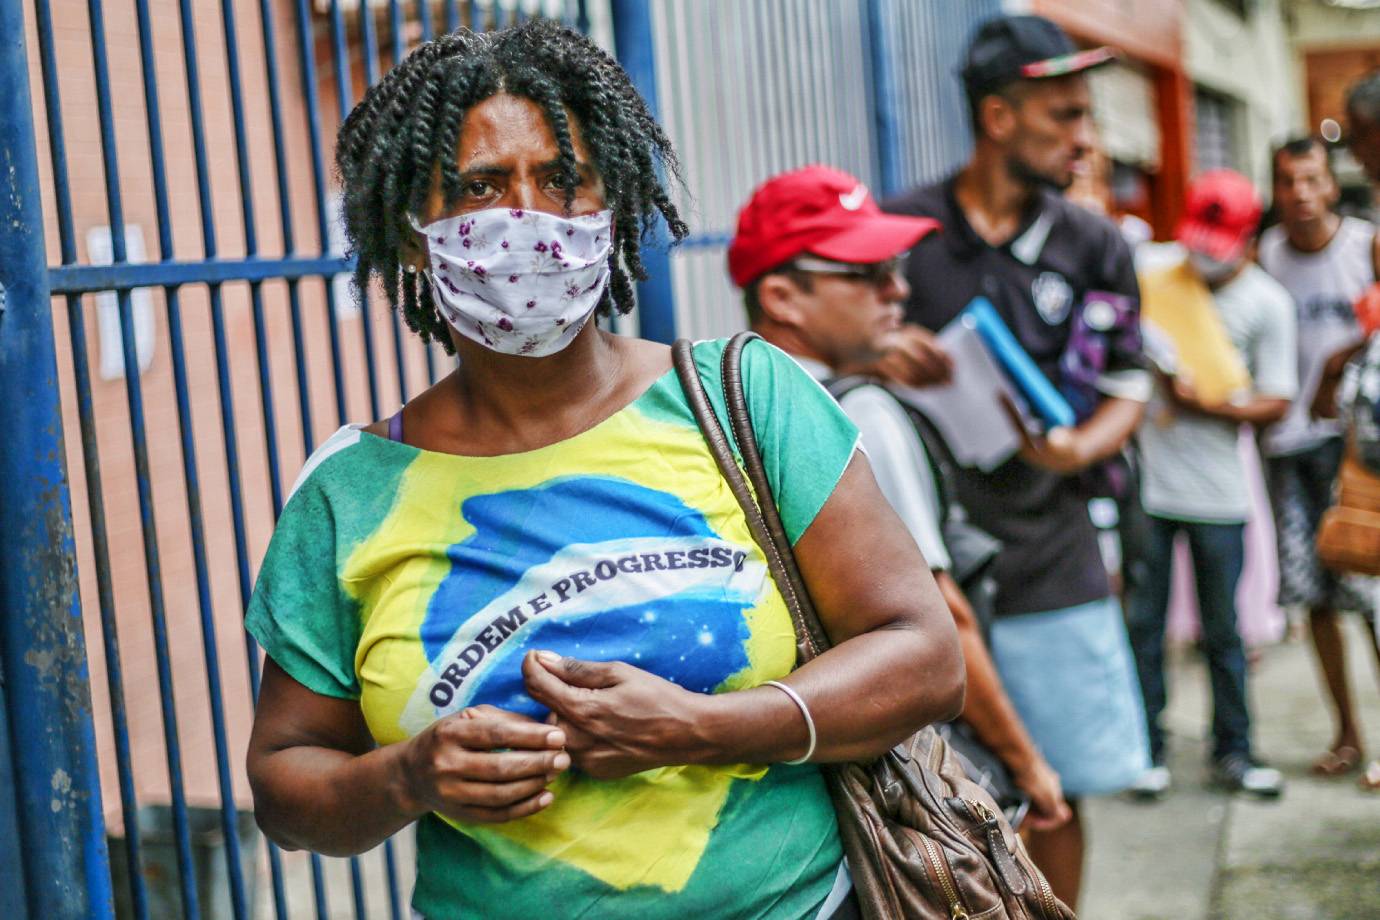 In Brazil, the epidemic is spreading unhindered, with more than one million infections and almost 50,000 deaths.